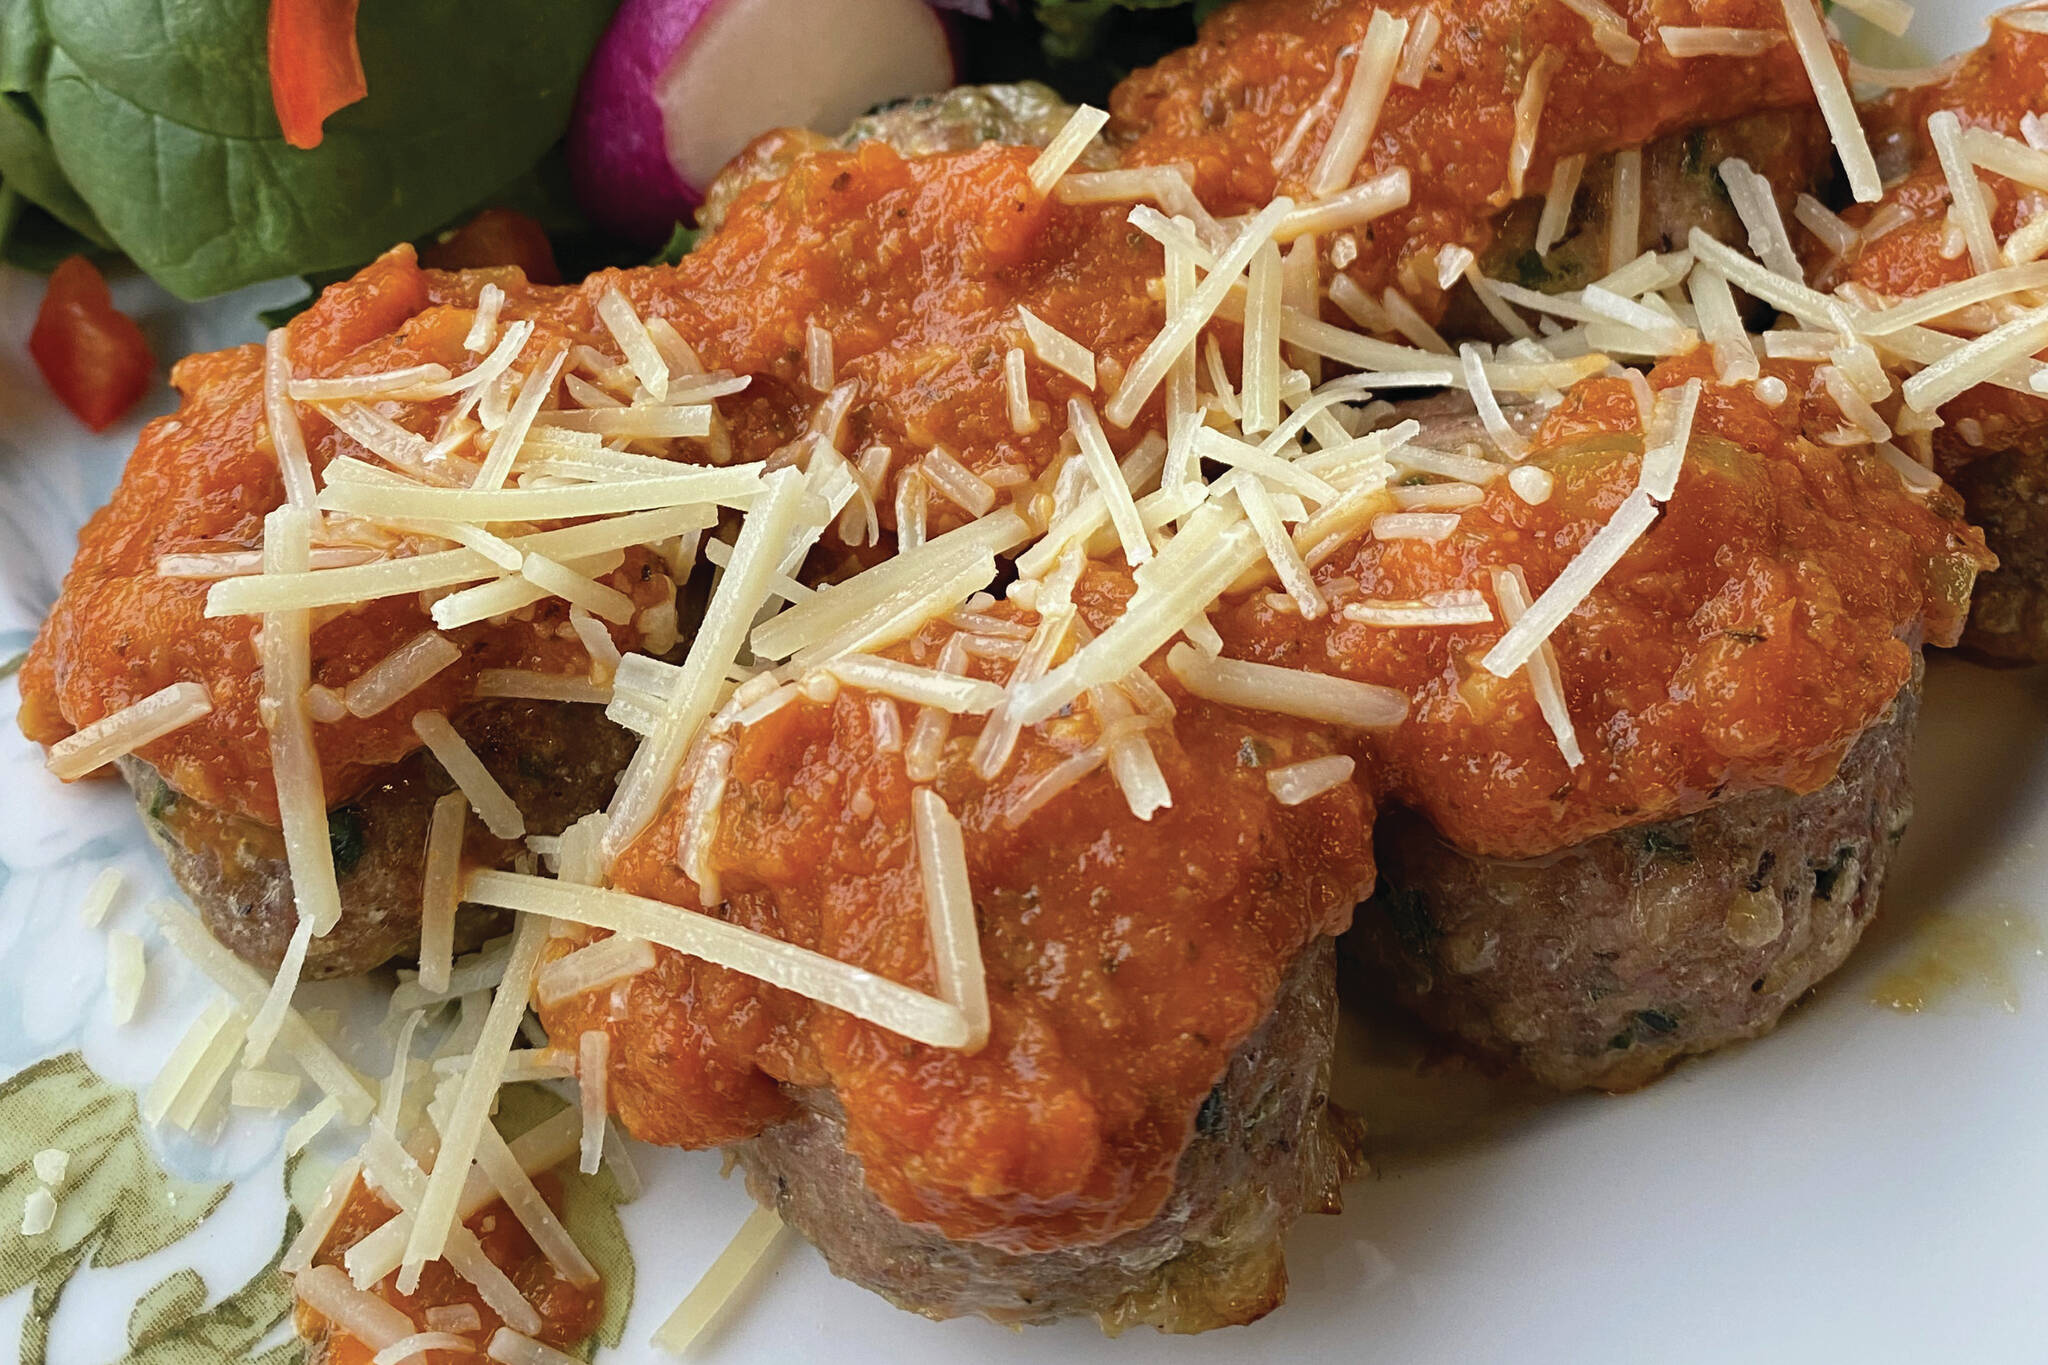 Slow spaghetti sauce and turkey meatballs are loaded with enough cheese and herbs to change your mind about ground turkey. (Photo by Tressa Dale/Peninsula Clarion)